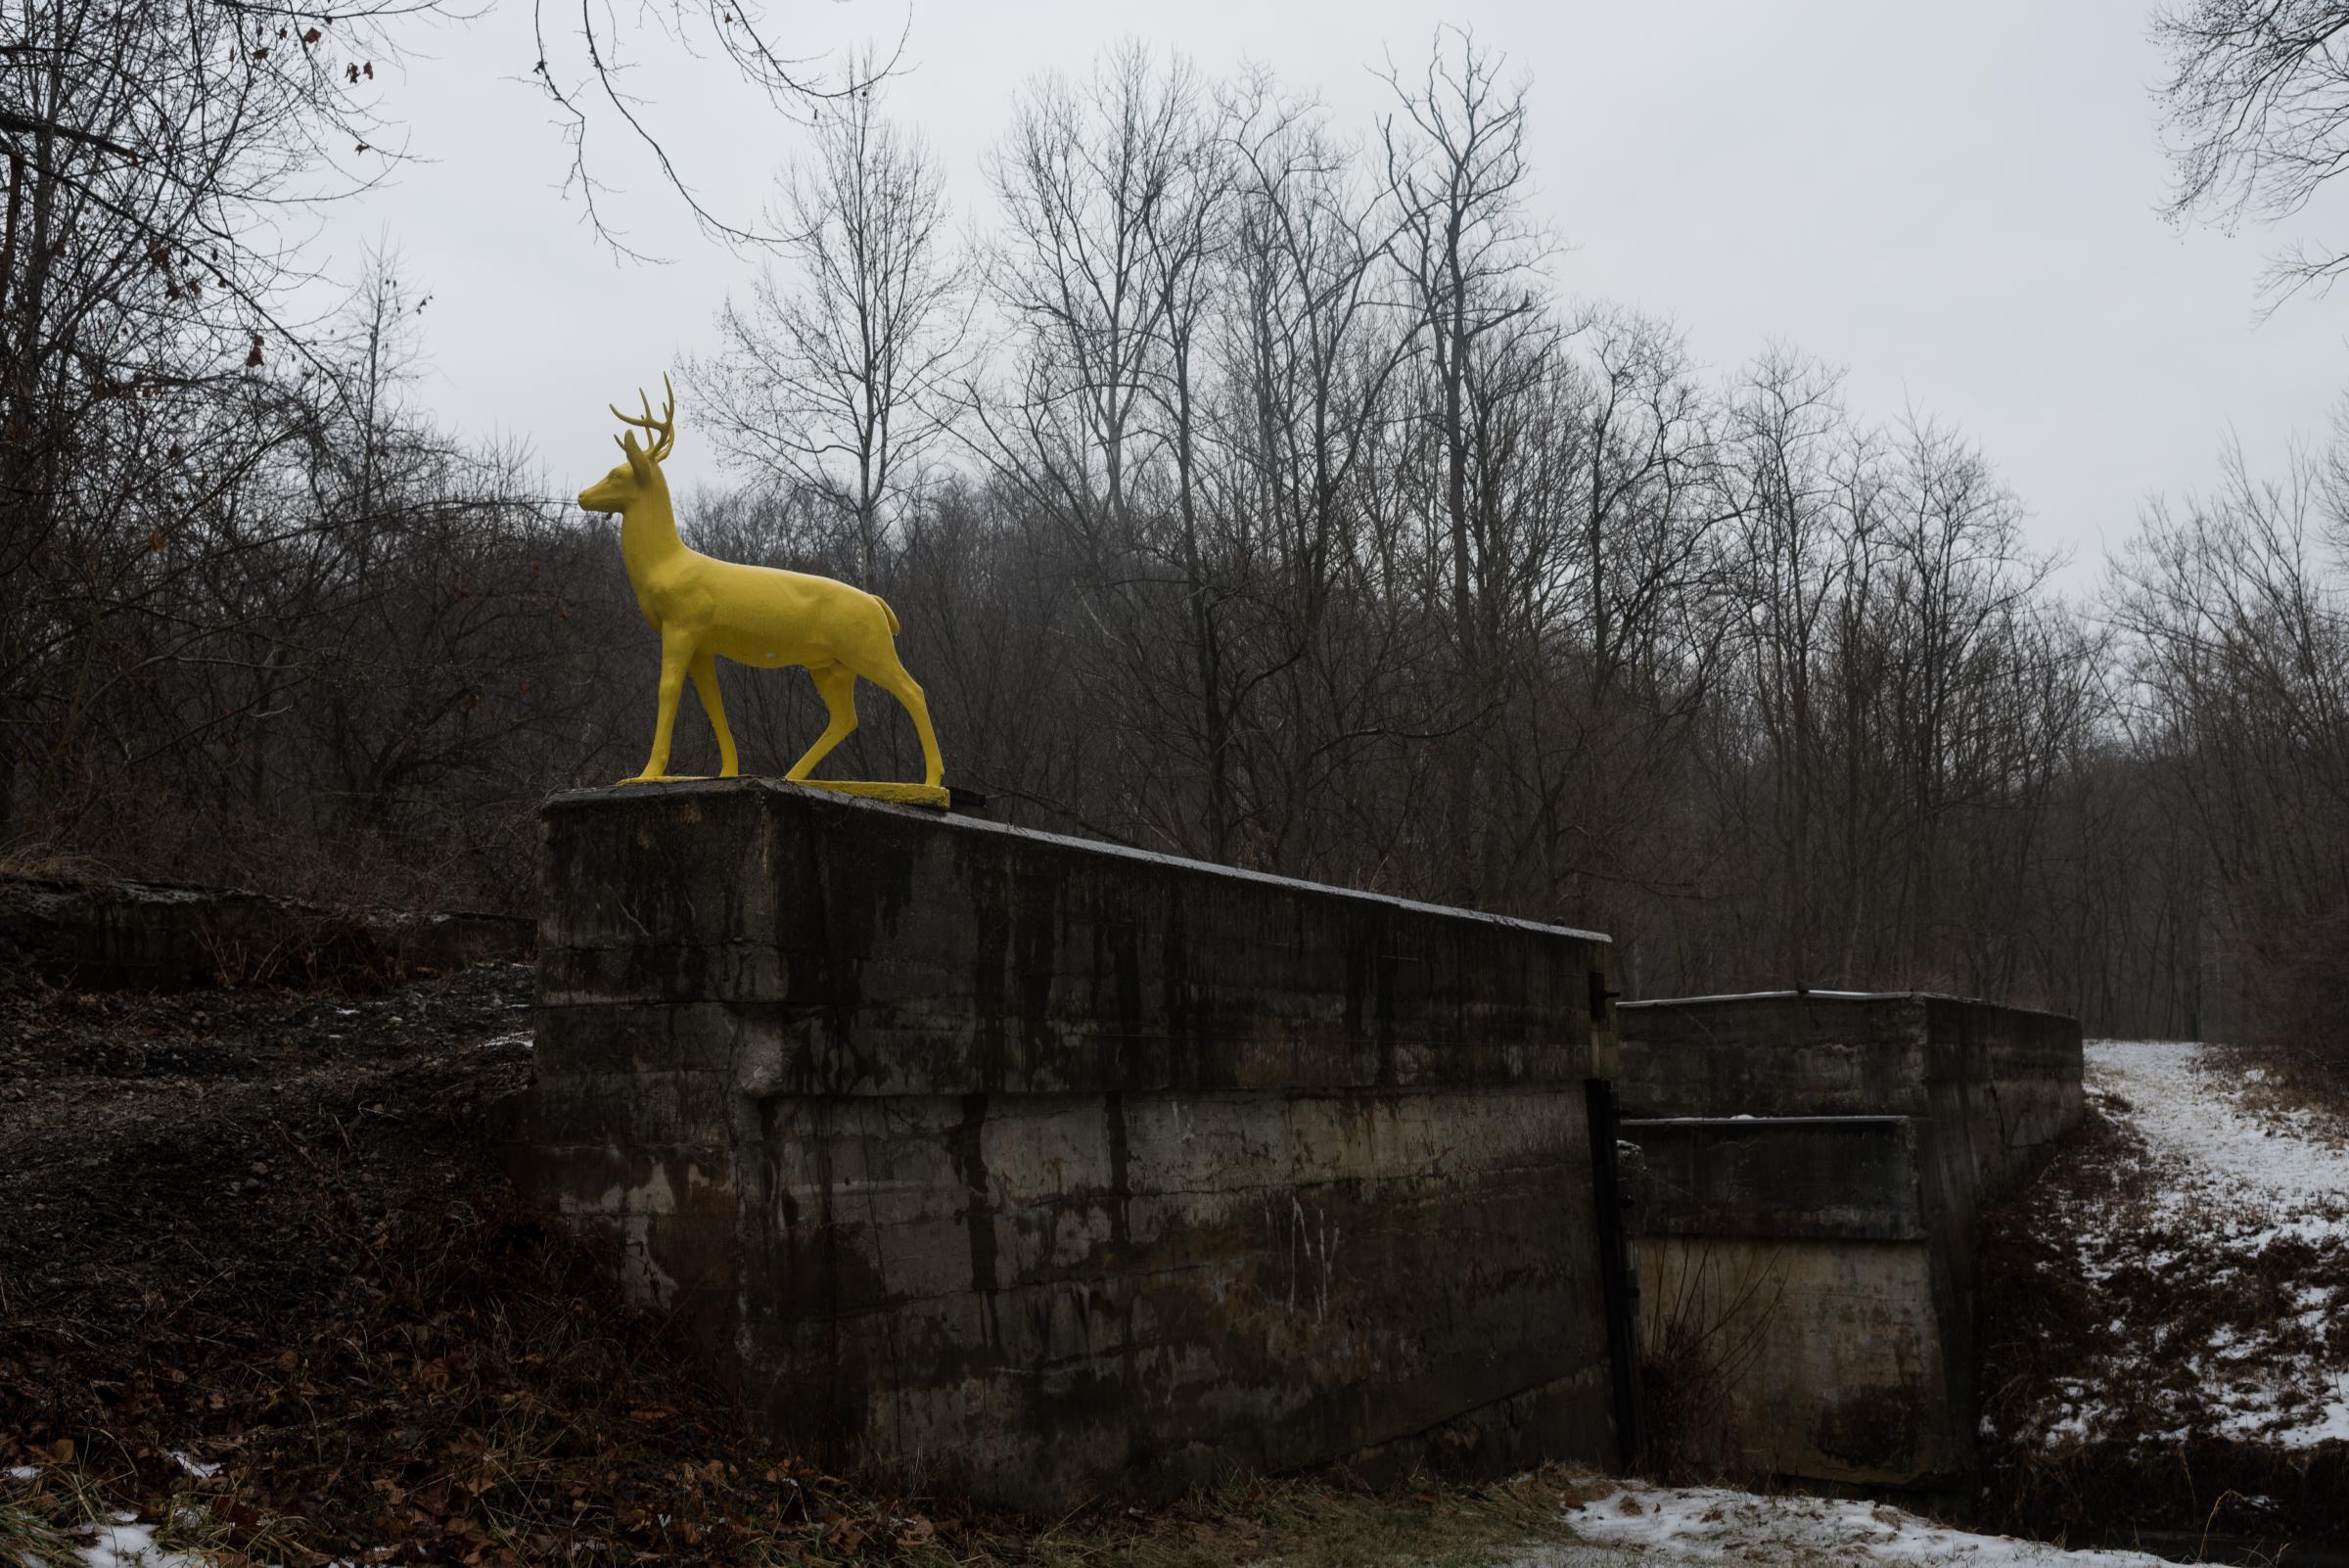 Coolville, Ohio - In 2014, Dave Rupe constructed a 300-pound deer statue...